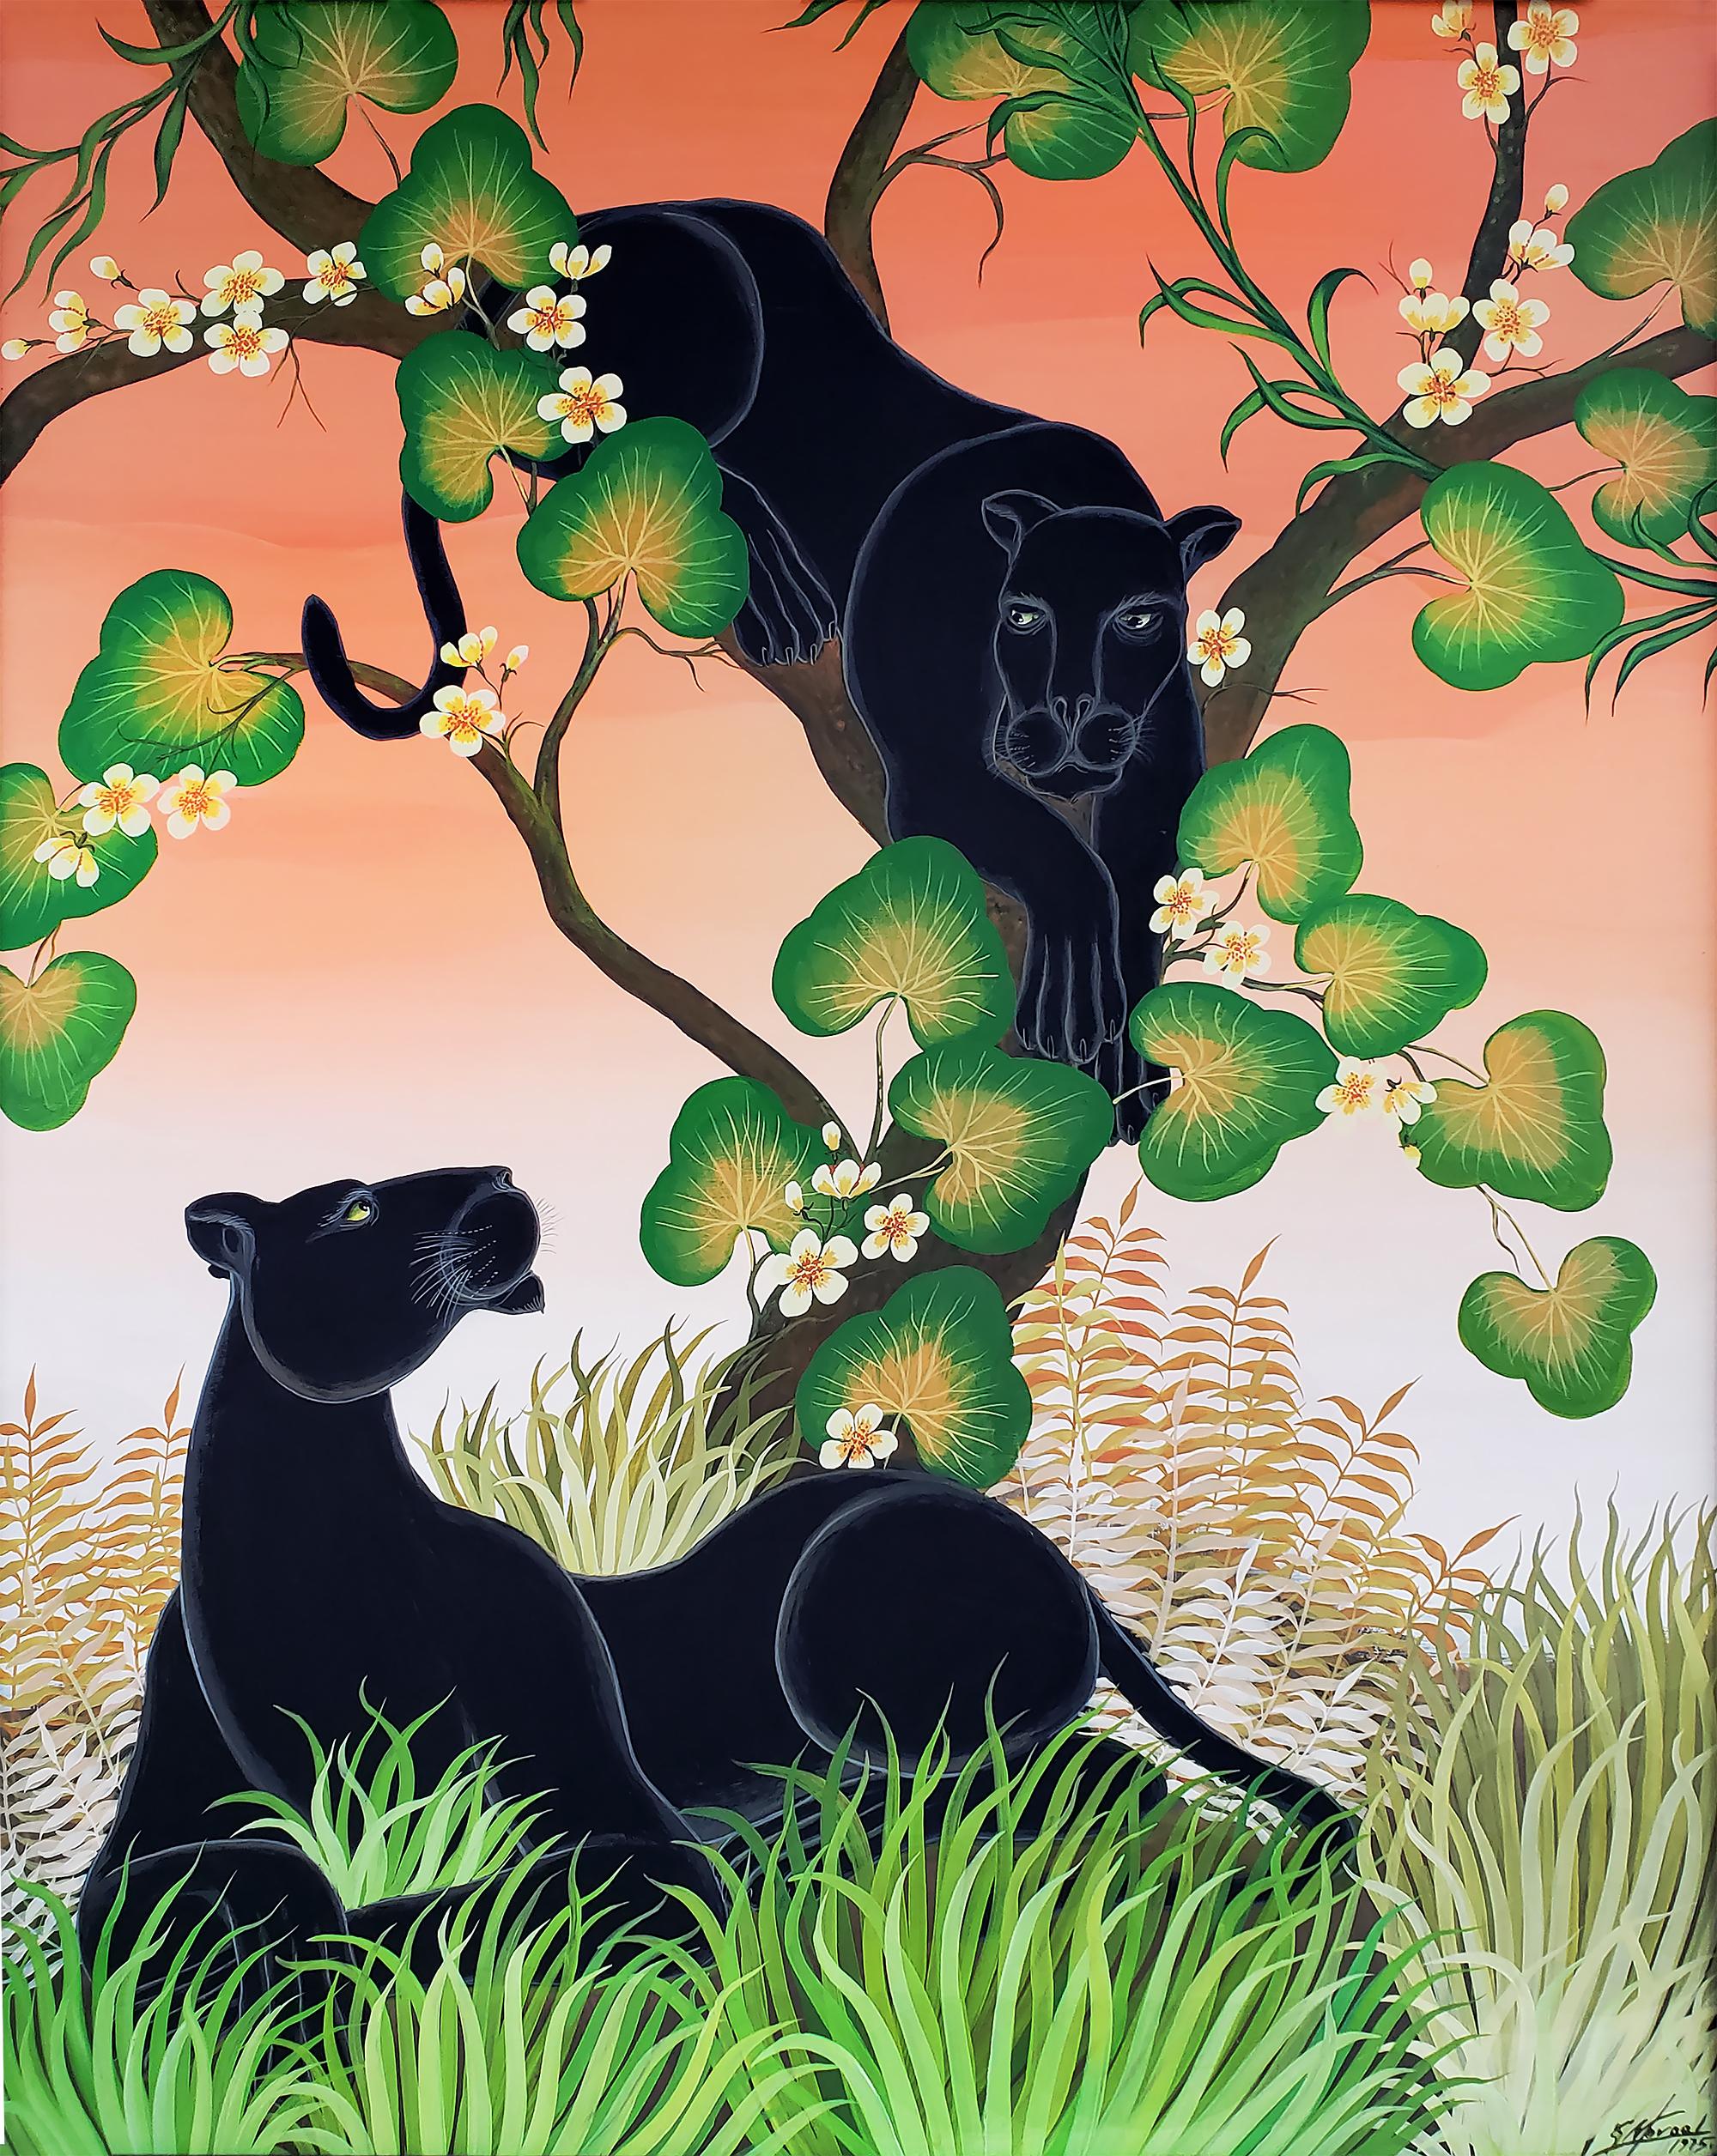 Gustavo Novoa Landscape Painting - Black Panthers in a tree with a peach sky - Black Cats